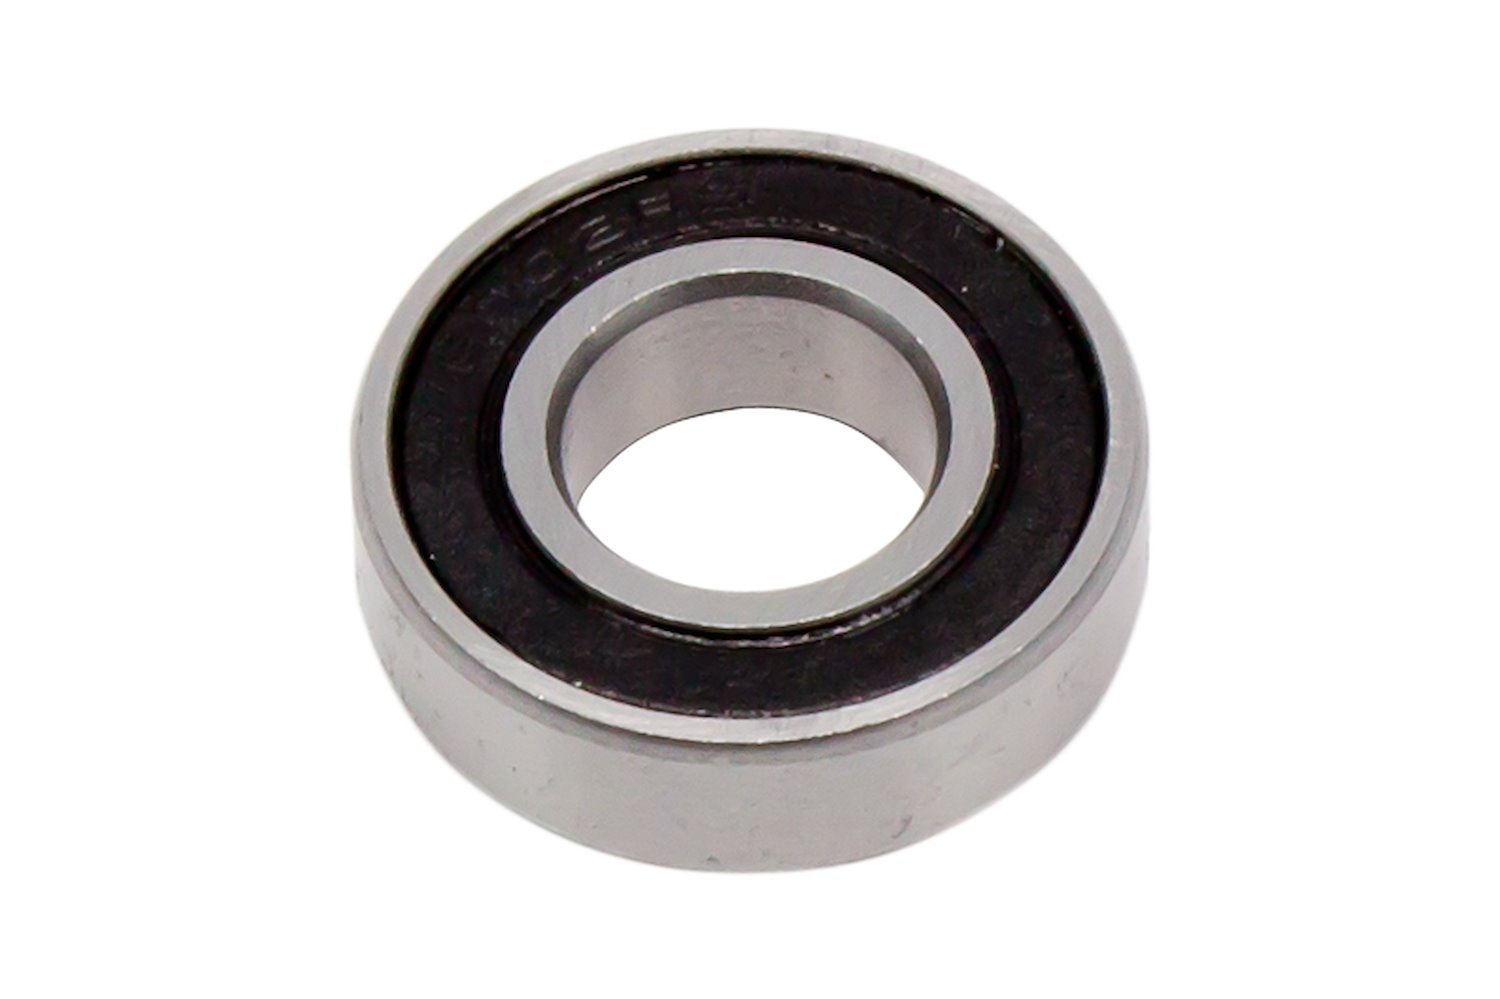 Clutch Pilot Bearing Fits Select Multiple Makes/Models